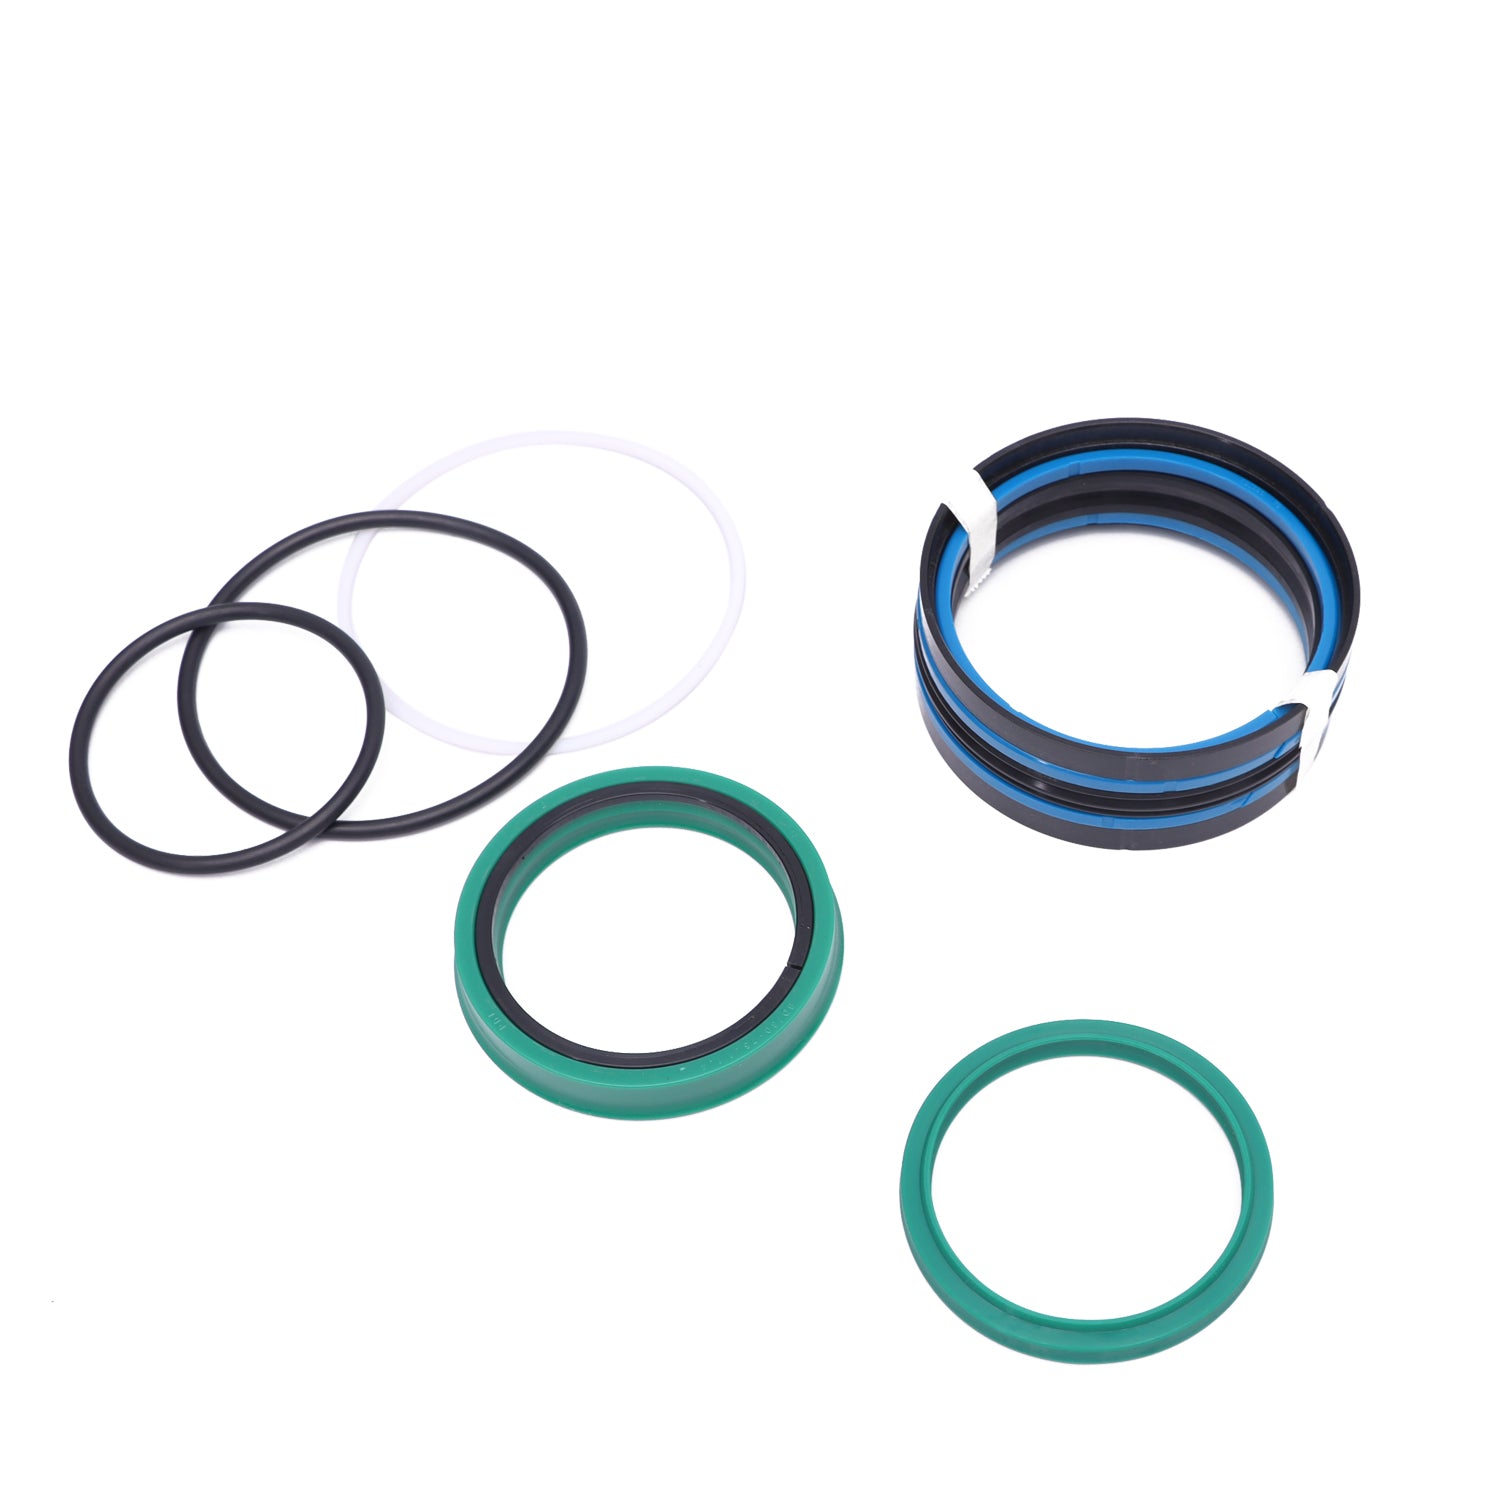 Outrigger Cylinder Seal Kit (90/60) for Schwing Trunk-Mounted Concrete Pump, Hydraulic Cylinder Sealing Kit for Schwing Stetter Boom Concrete Pump, fits 10100484, 10136772, 10113910. - KUDUPARTS